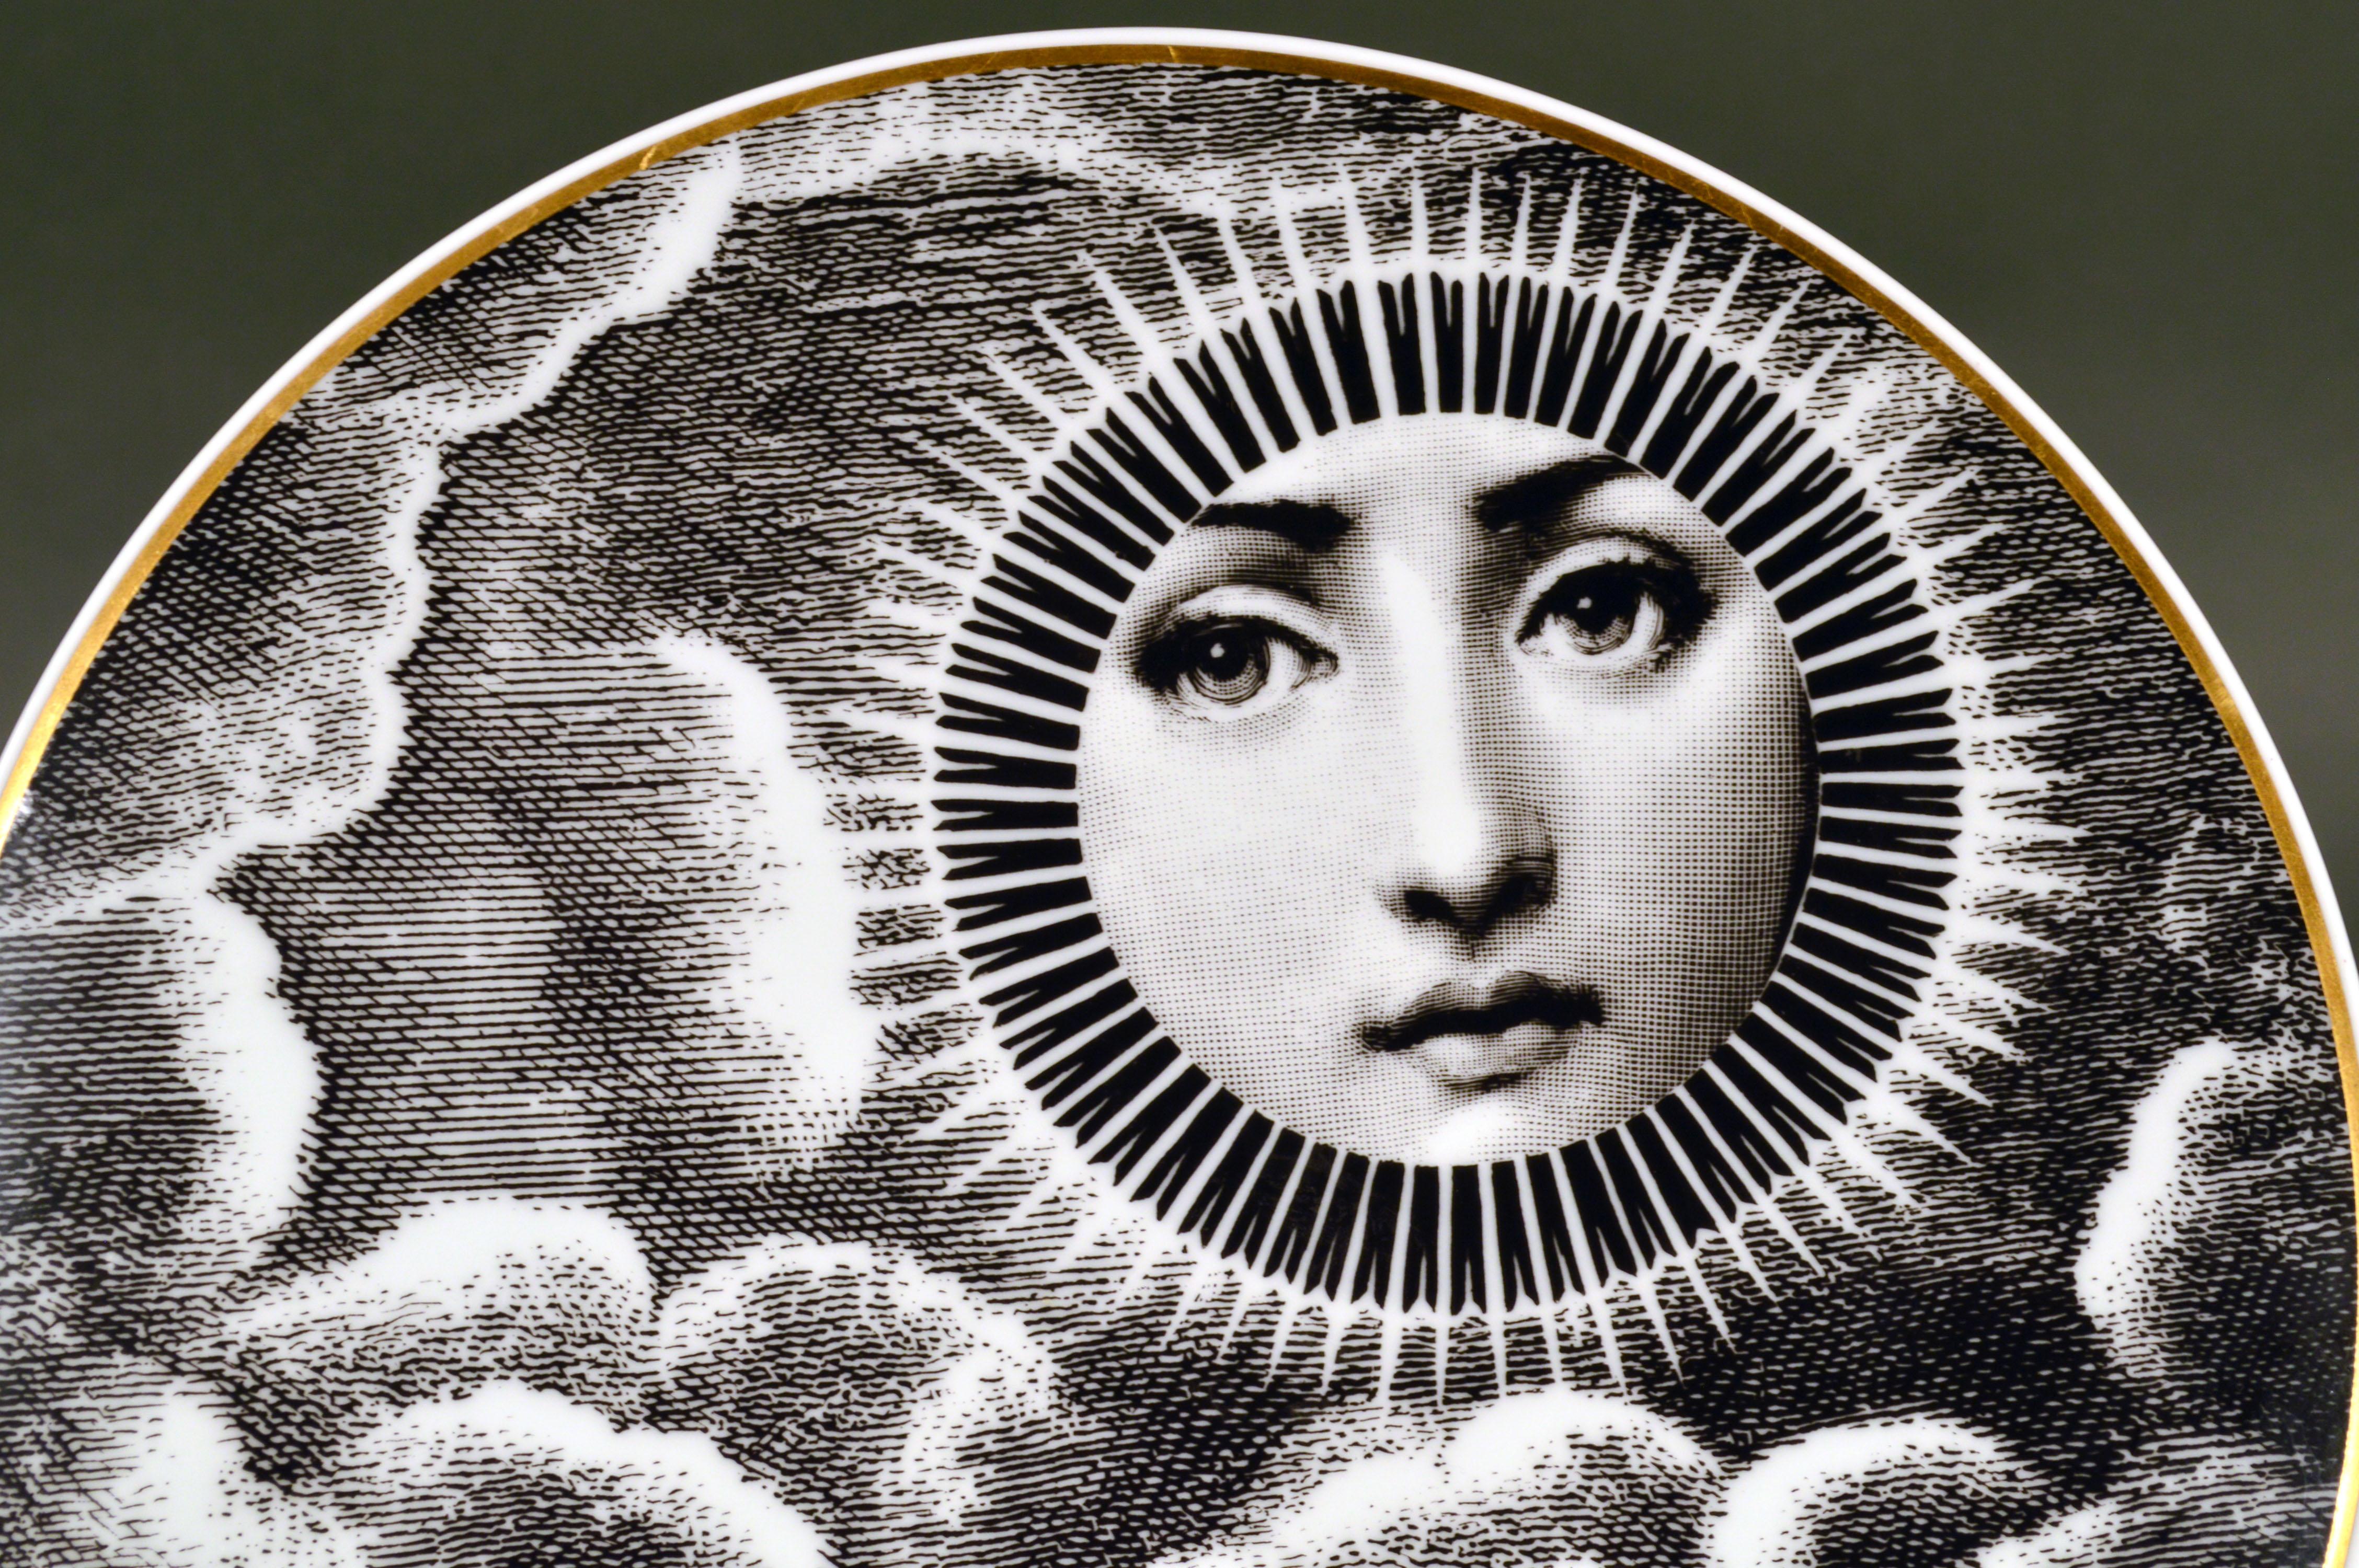 Rosenthal Piero Fornasetti themes and variations Motiv 18,
1980s.


The striking Rosenthal Fornasetti gold-rimmed black and white printed plate with the face of Lina Cavalieri.

Diameter: 9 1/4 inches

During the 1980s Rosenthal helped